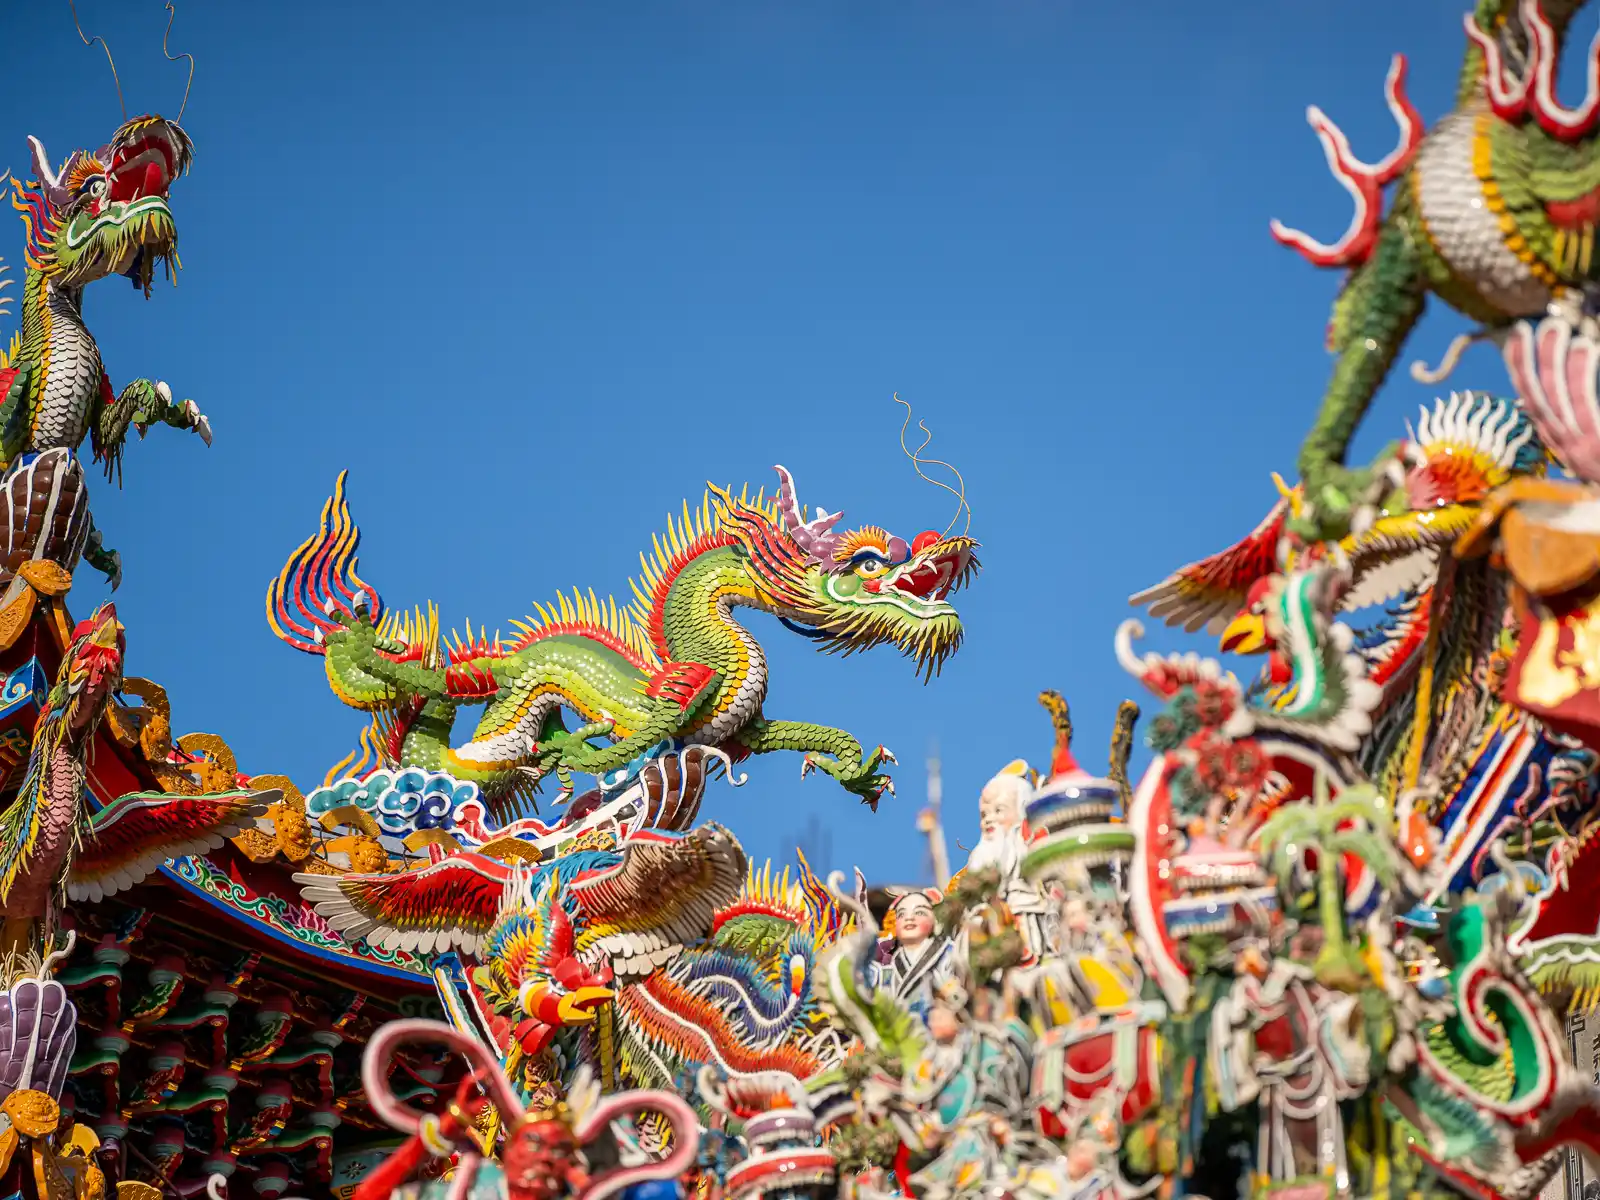 A beautiful hand-painted dragon carving can be seen on Dajia Jenn Lann Temples roof.